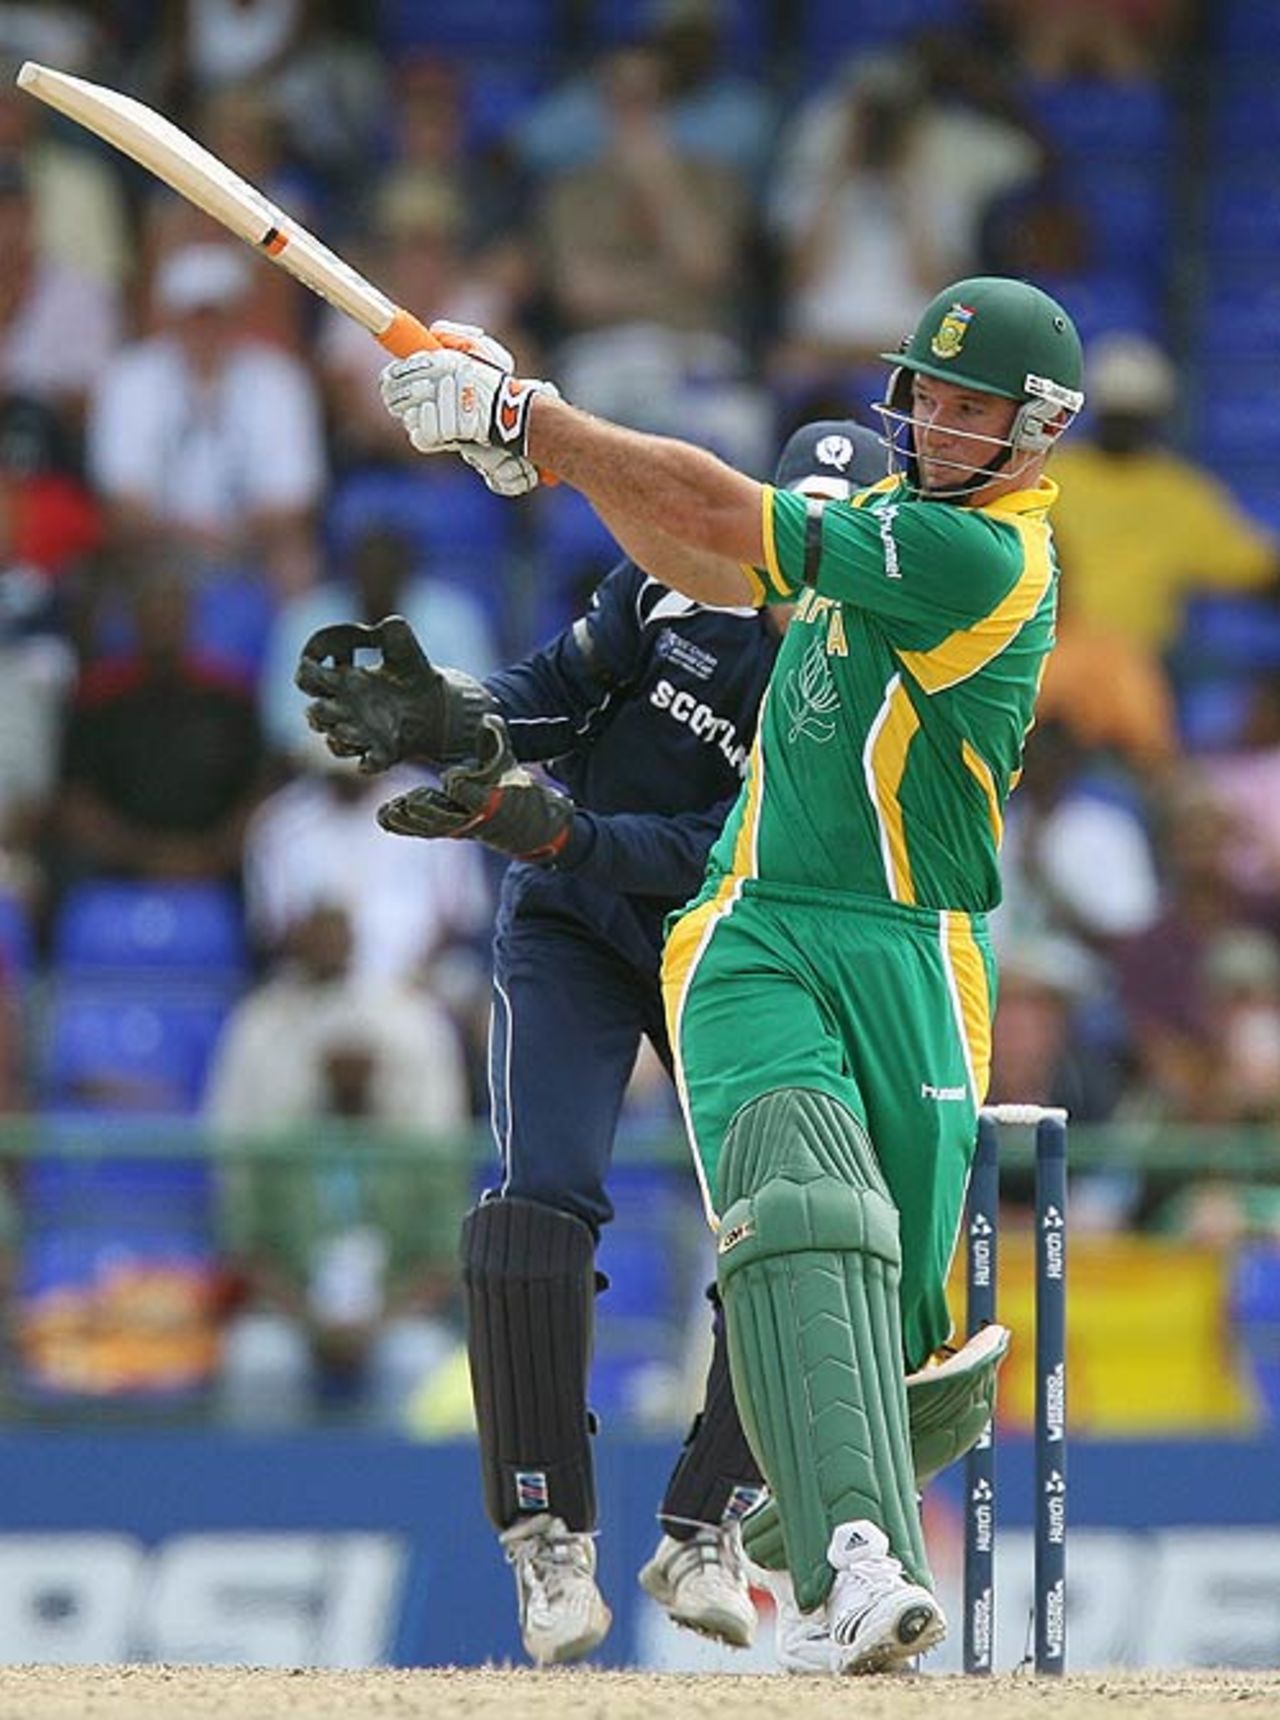 Graeme Smith pulls to the fence, Scotland v South Africa, Group A, St Kitts, March 20, 2007